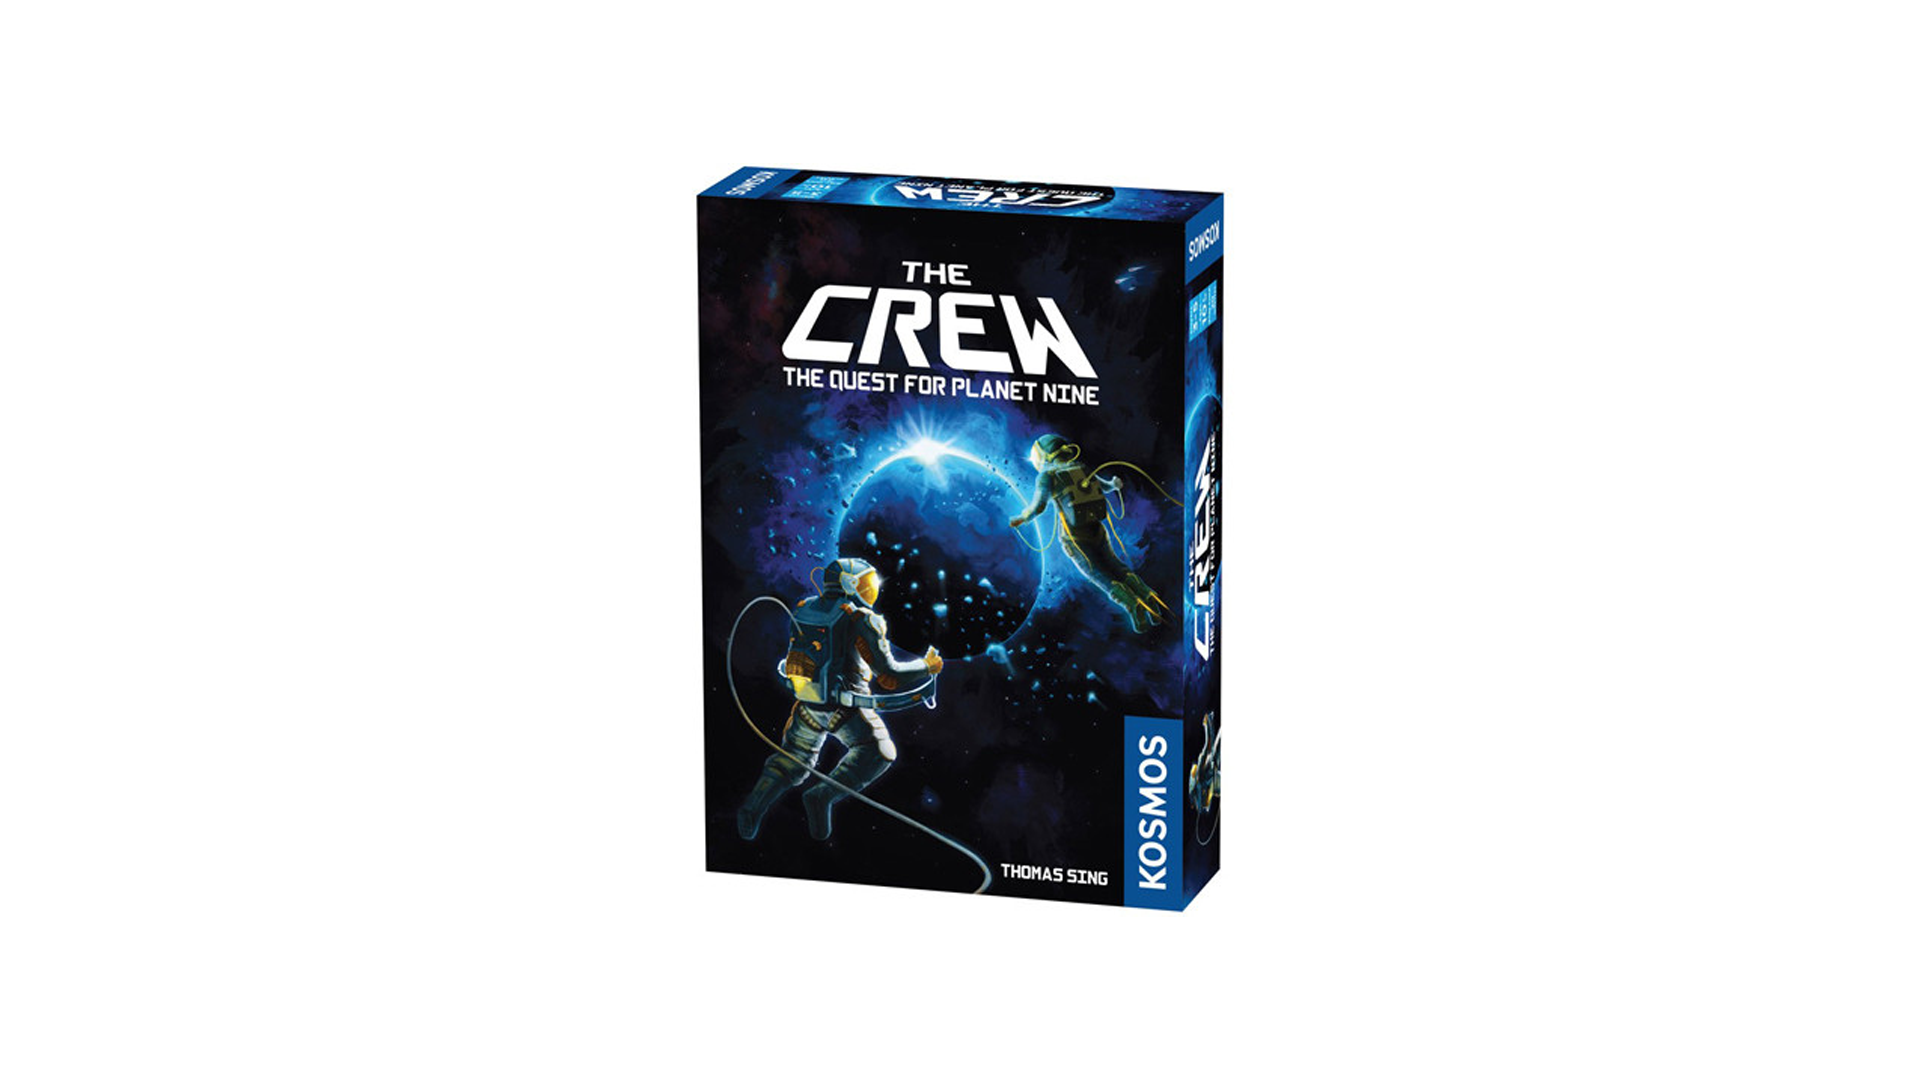 The Crew: The Quest for Planet Nine is a sci-fi card game that looks like it's going to get big in 2020.